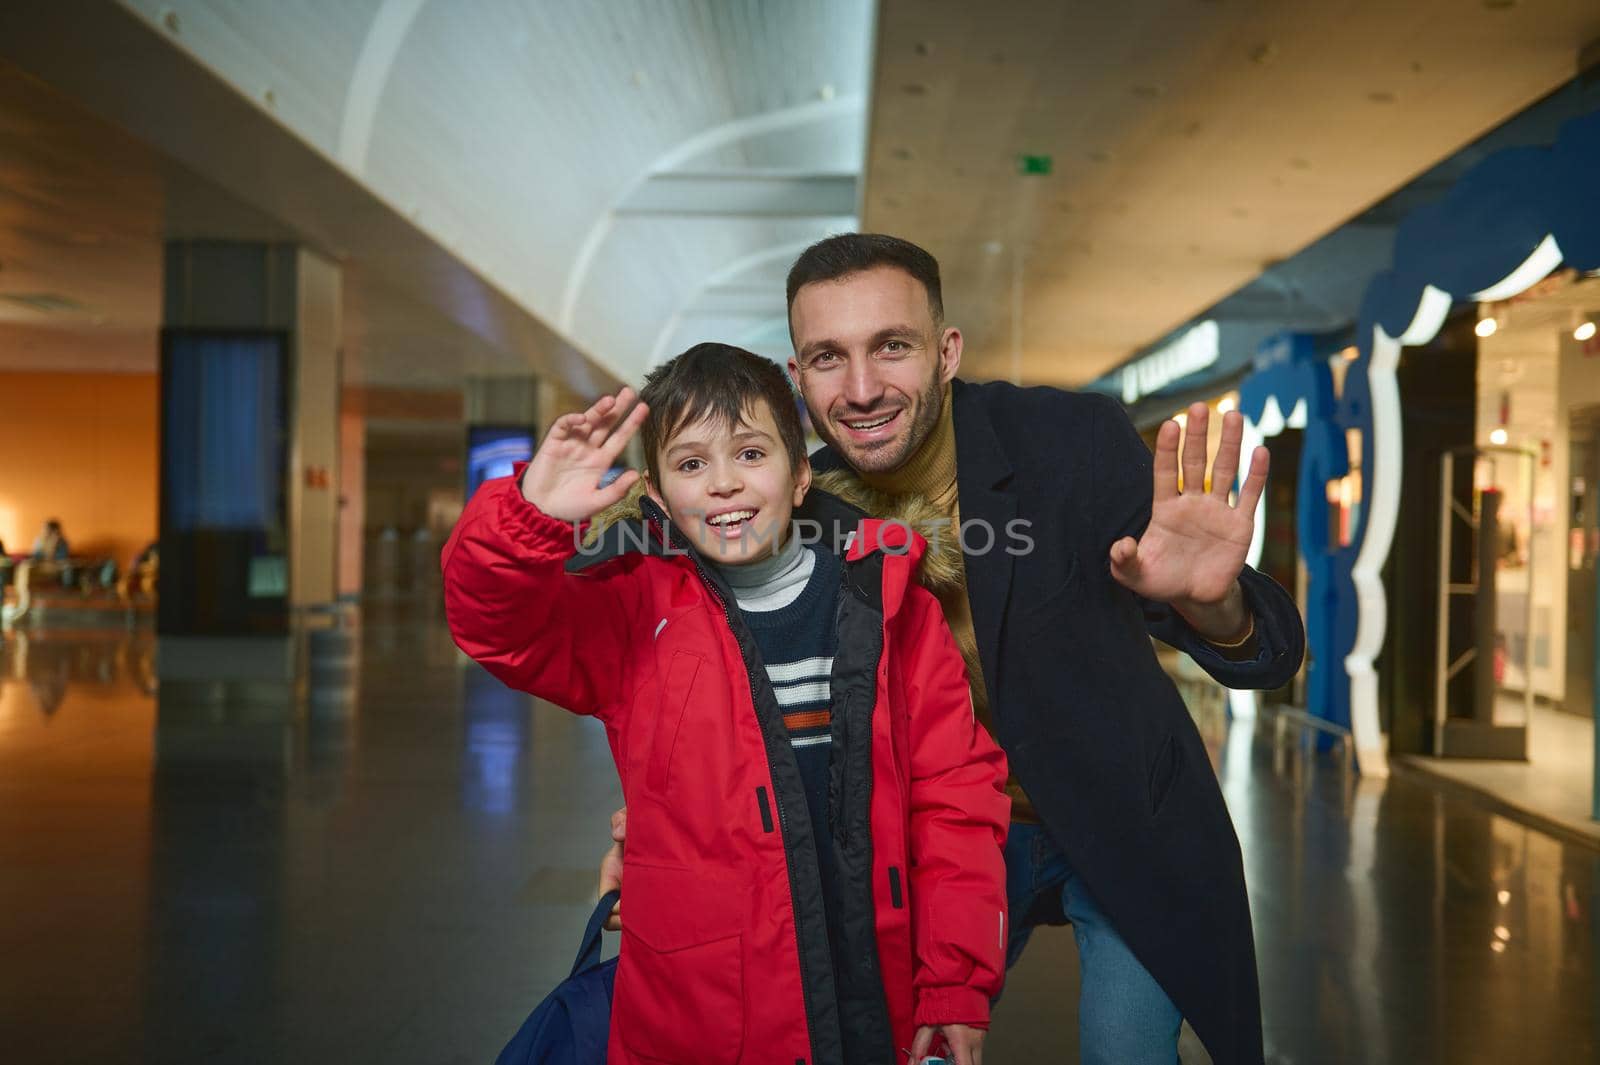 Happy boy and his father, transit passengers smile and wave at camera while walking along duty free shops in international airport departure terminal by artgf